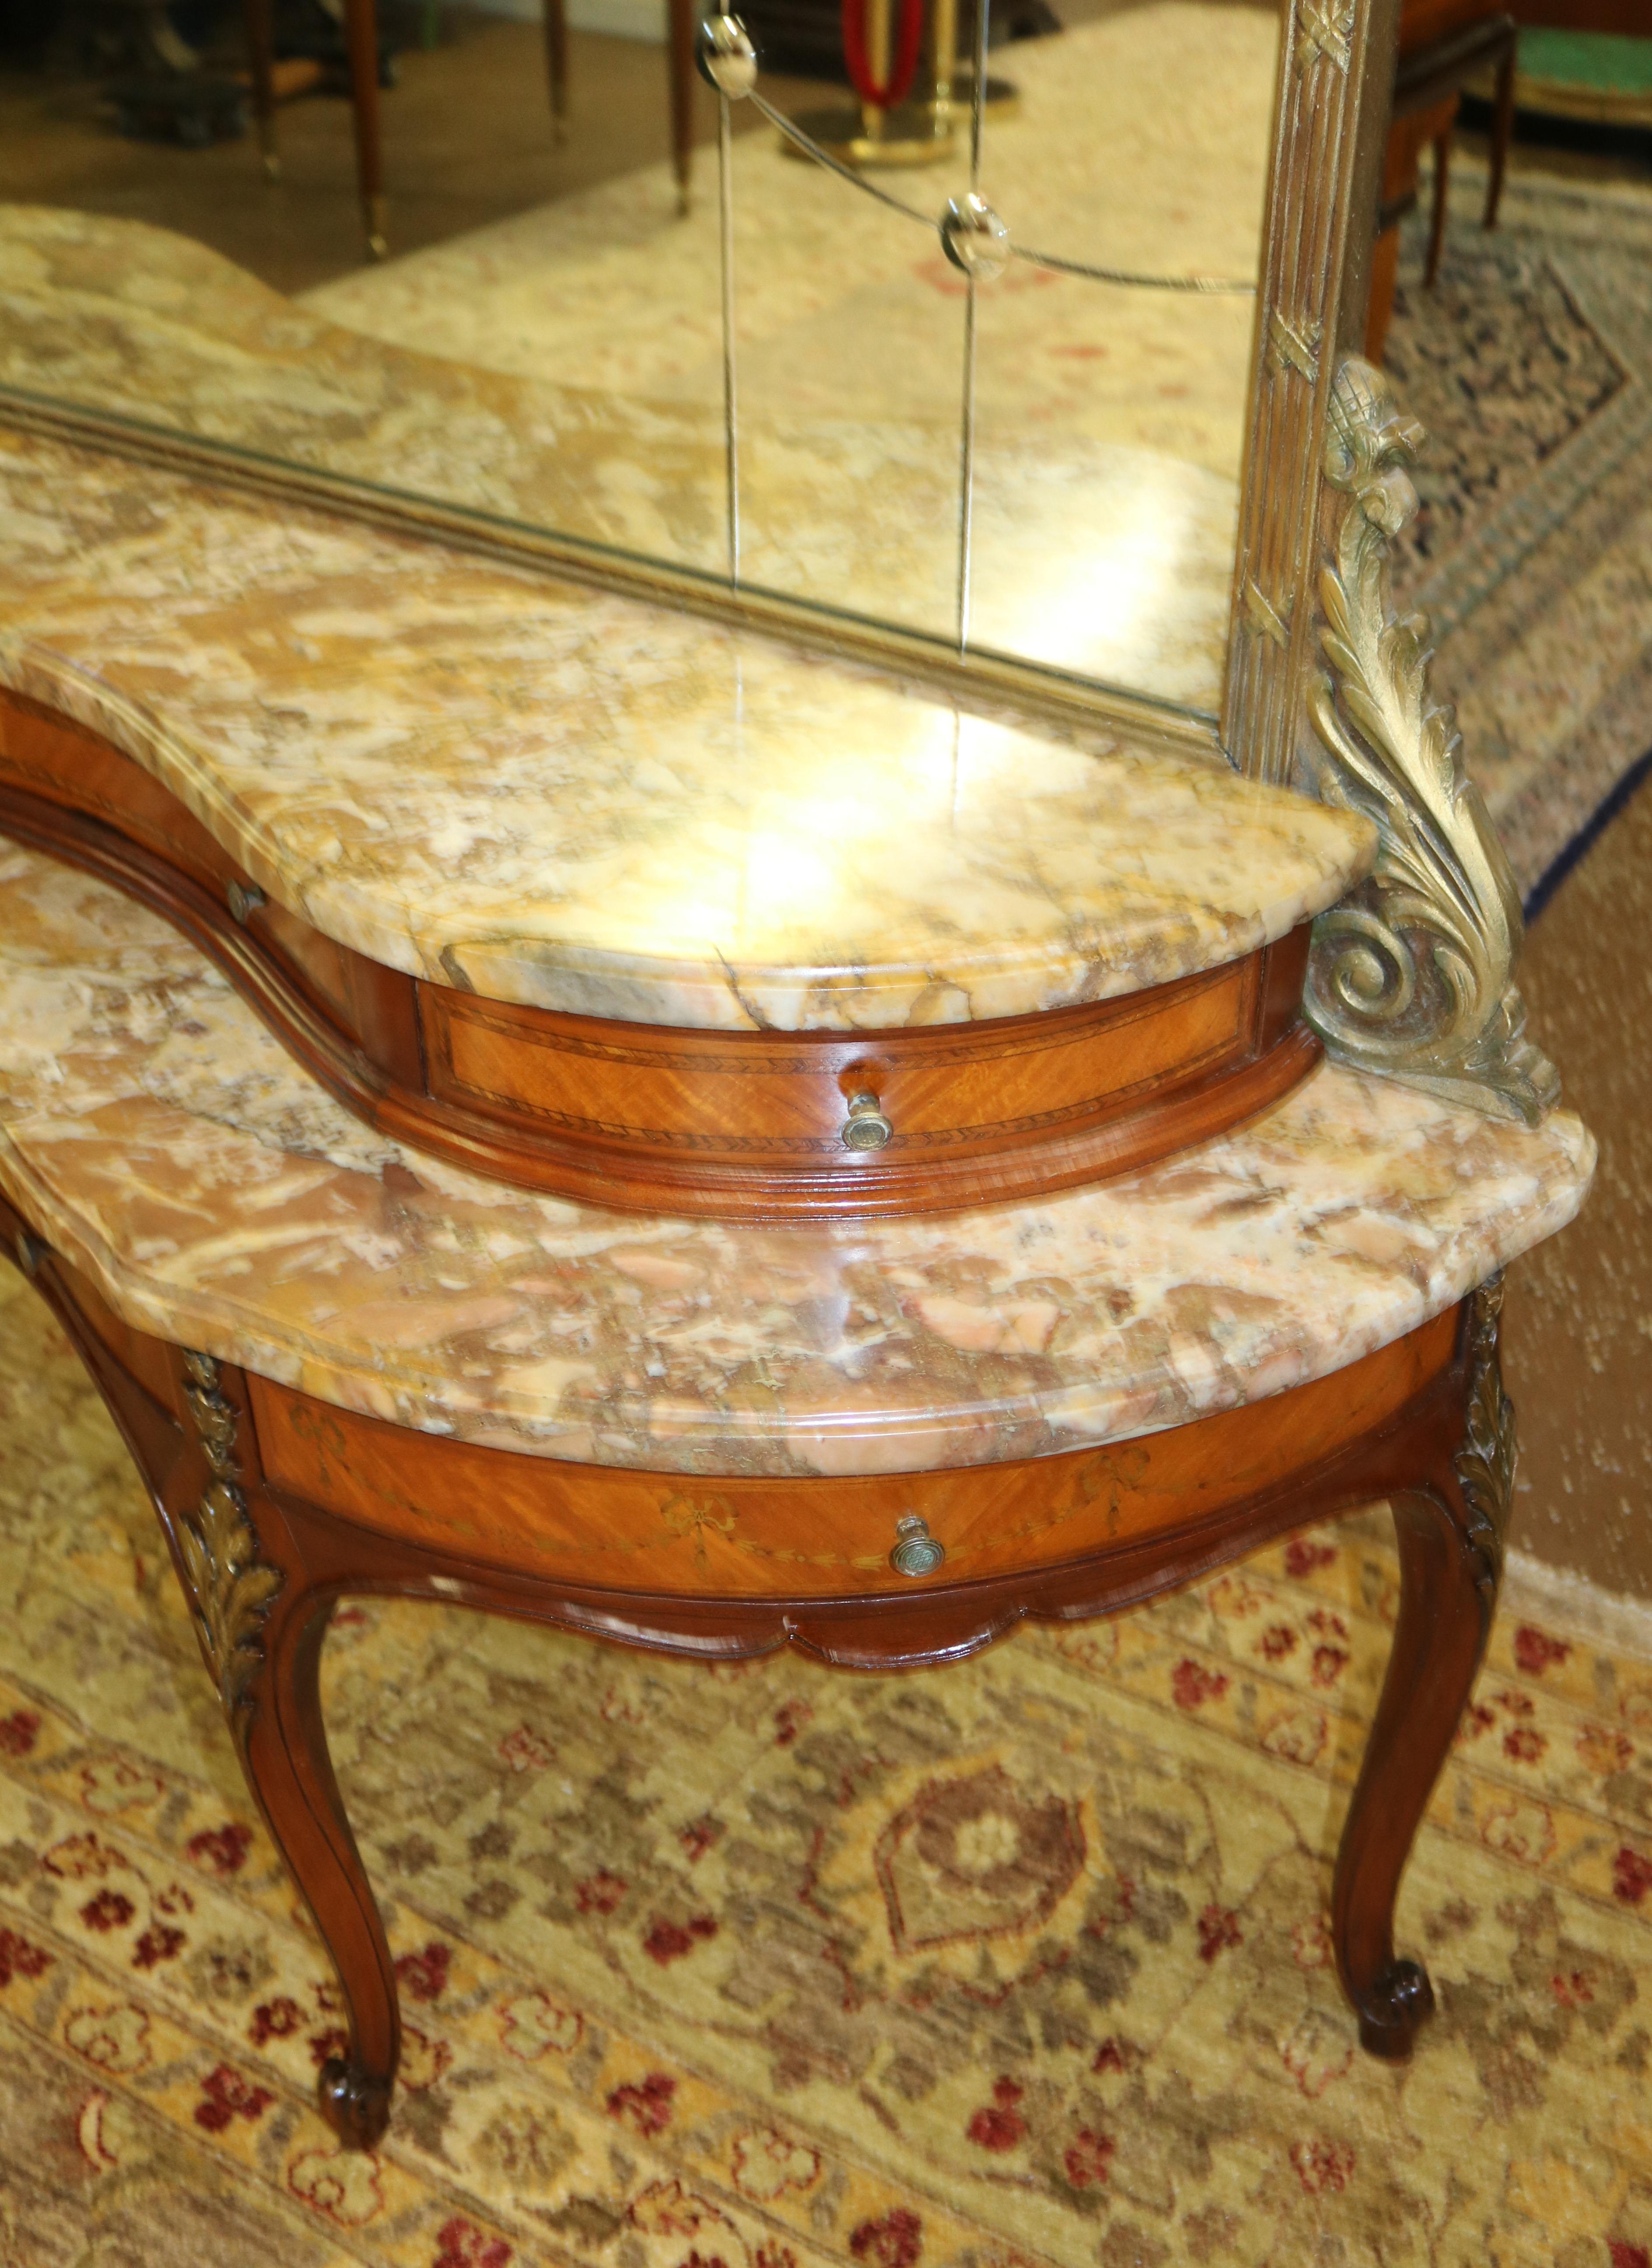 Etched Gold Mirror Marble Top Kingwood Vanity Circa 1920 In Good Condition For Sale In Long Branch, NJ